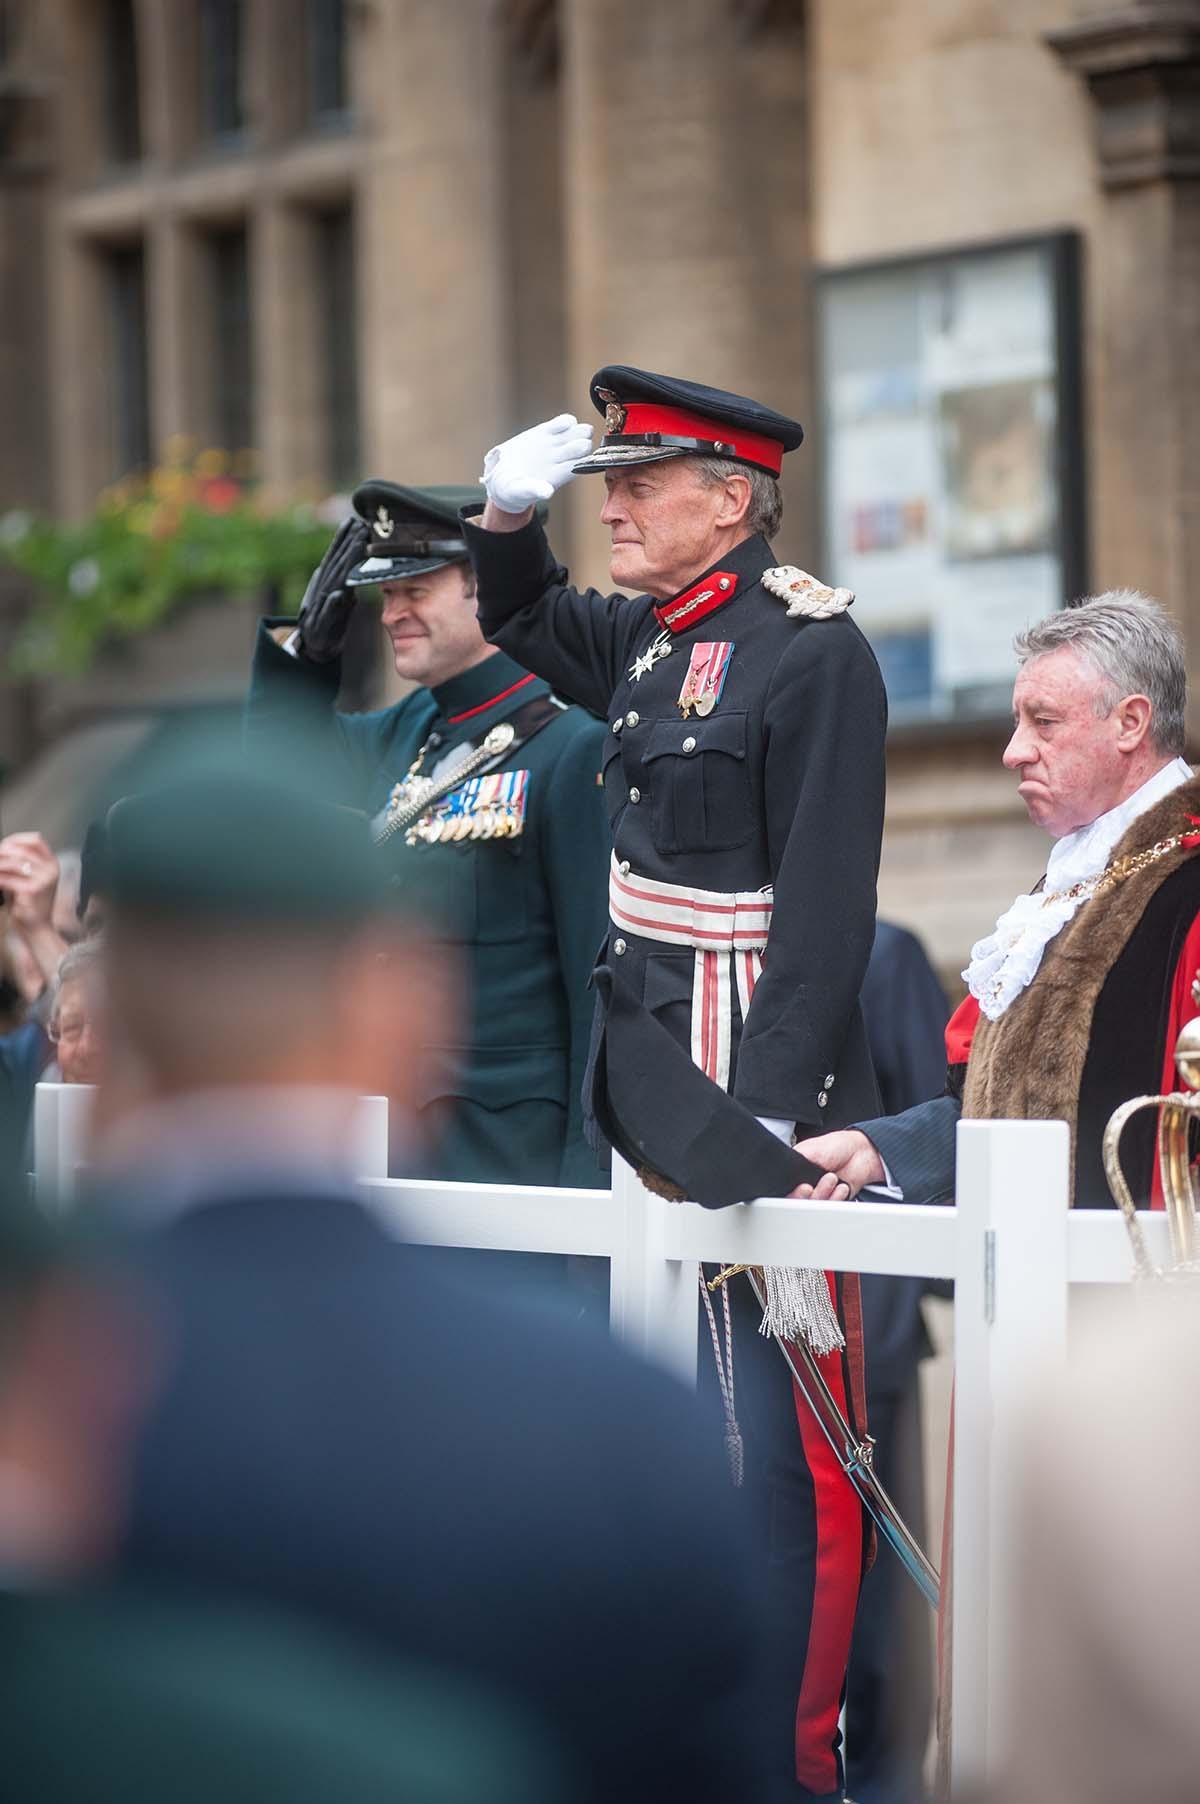 The Rifles Freedom of the City Parade, Oxford. May 24th 2015